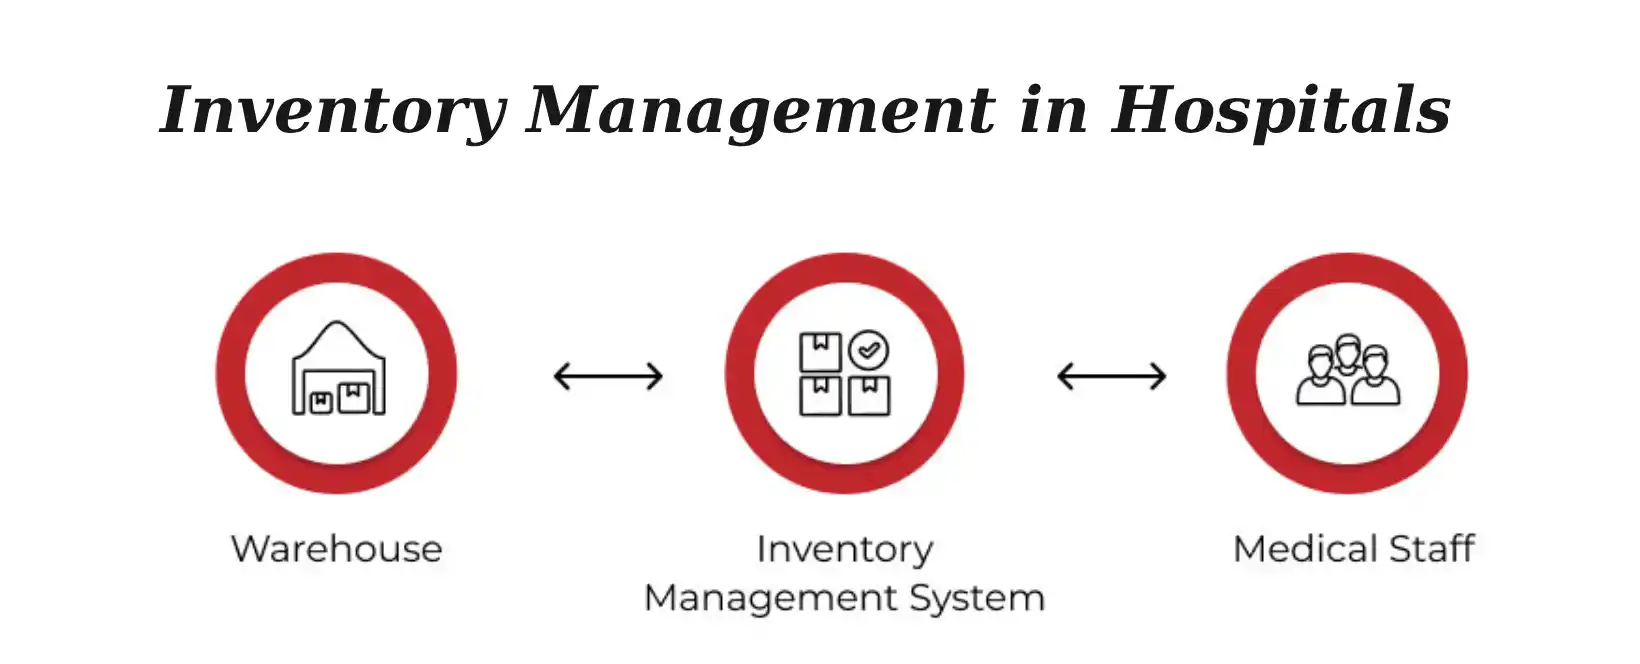 Inventory Management in Hospitals